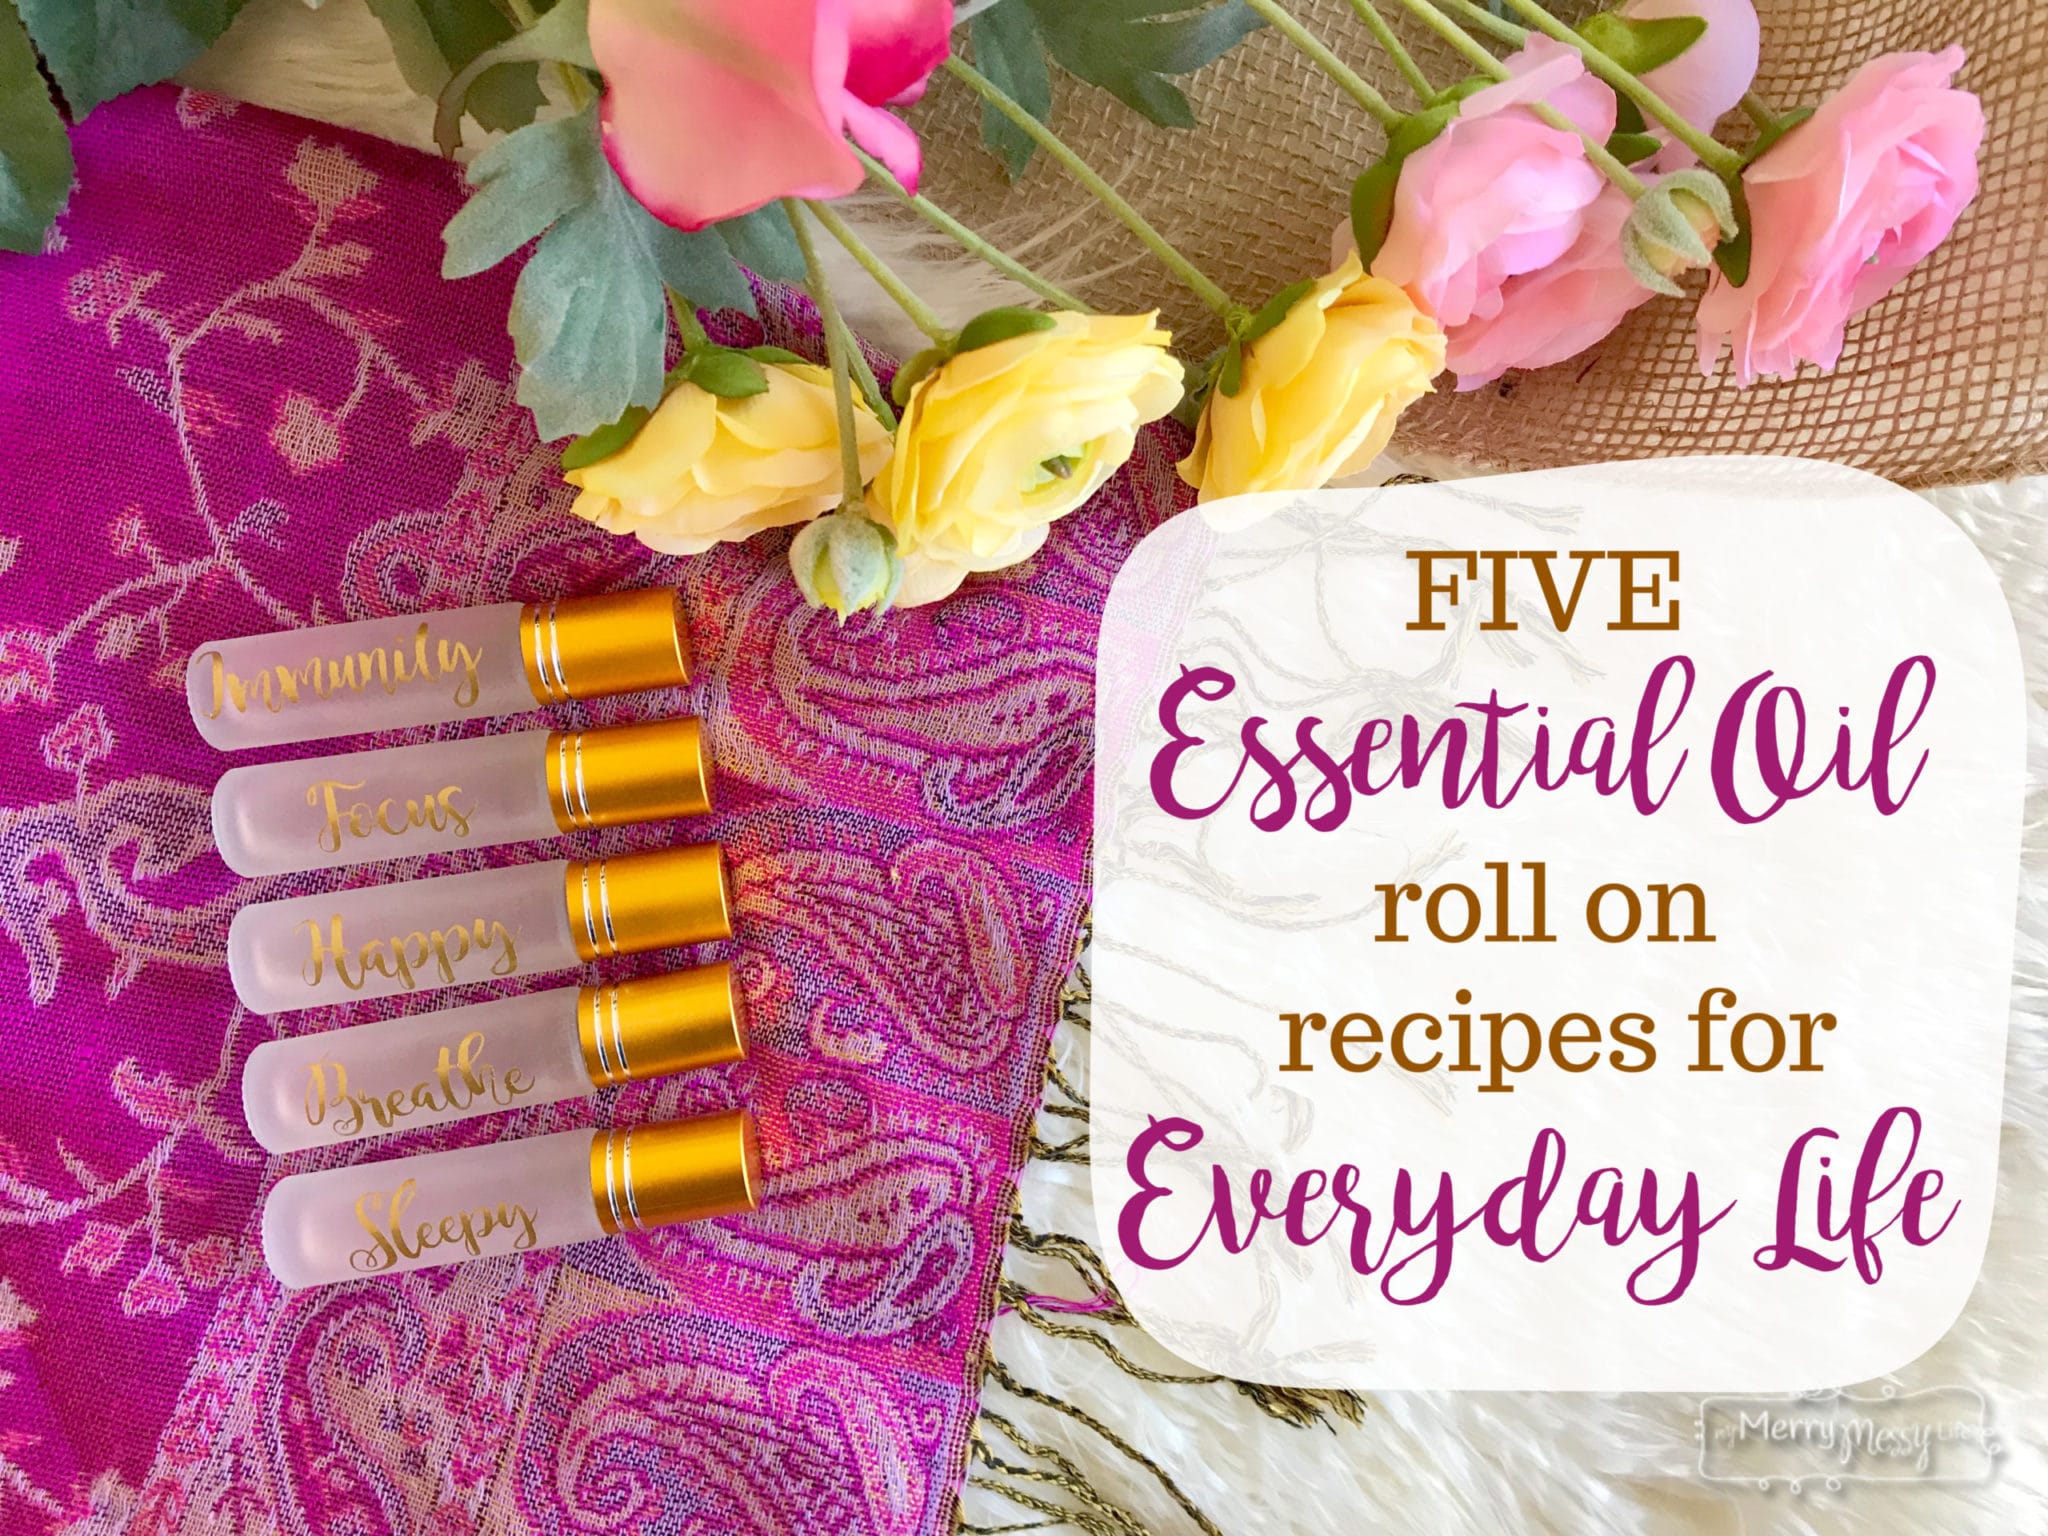 5 Essential Oil Roll On Recipes for Everyday Life